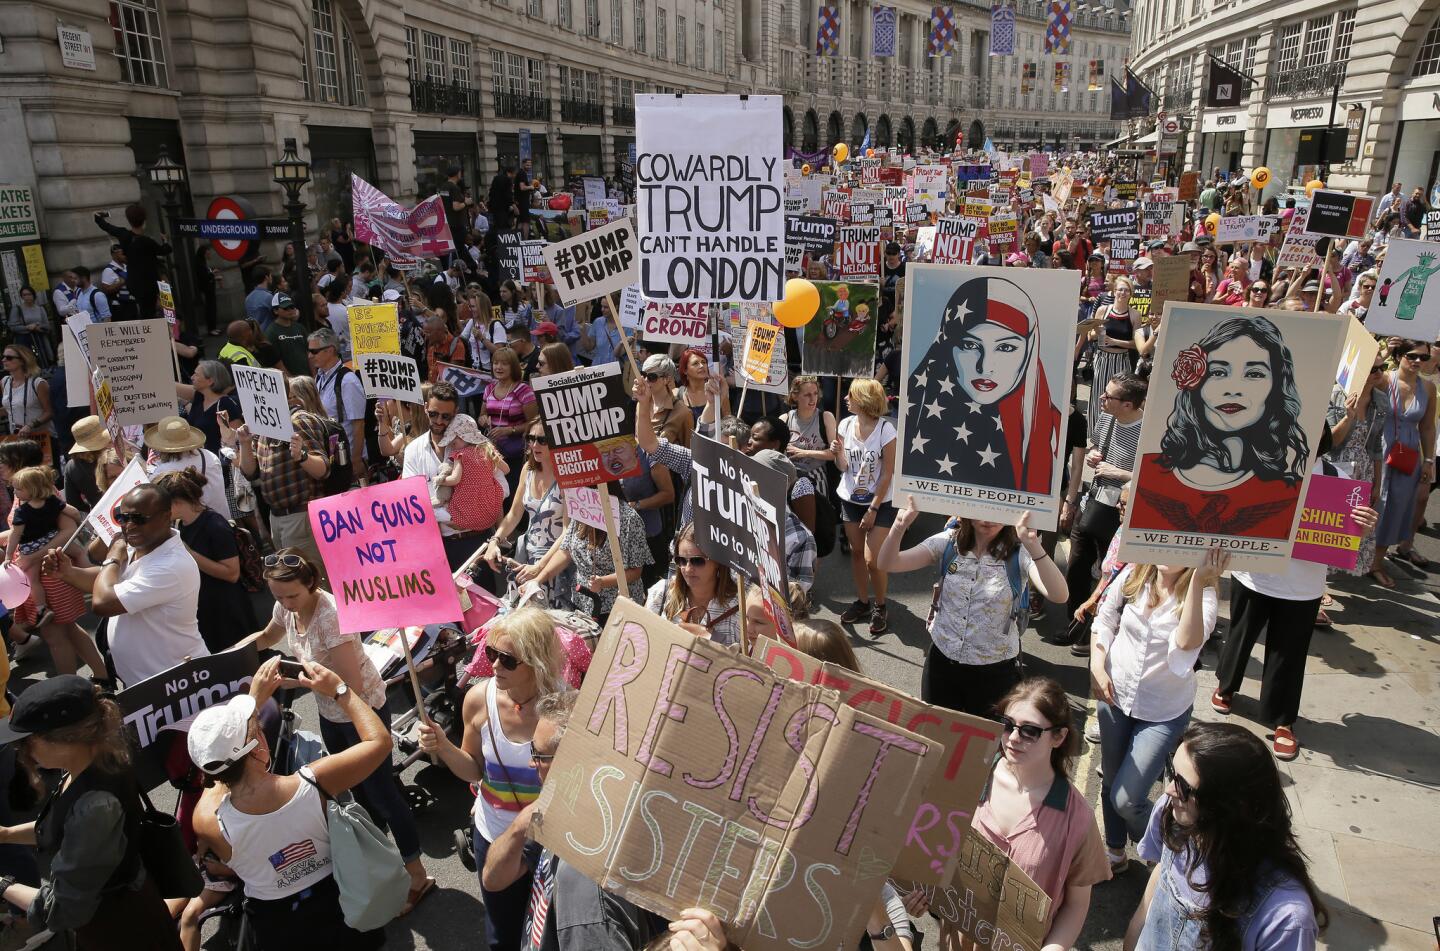 ct-protesters-greet-donald-trump-in-london-201-005